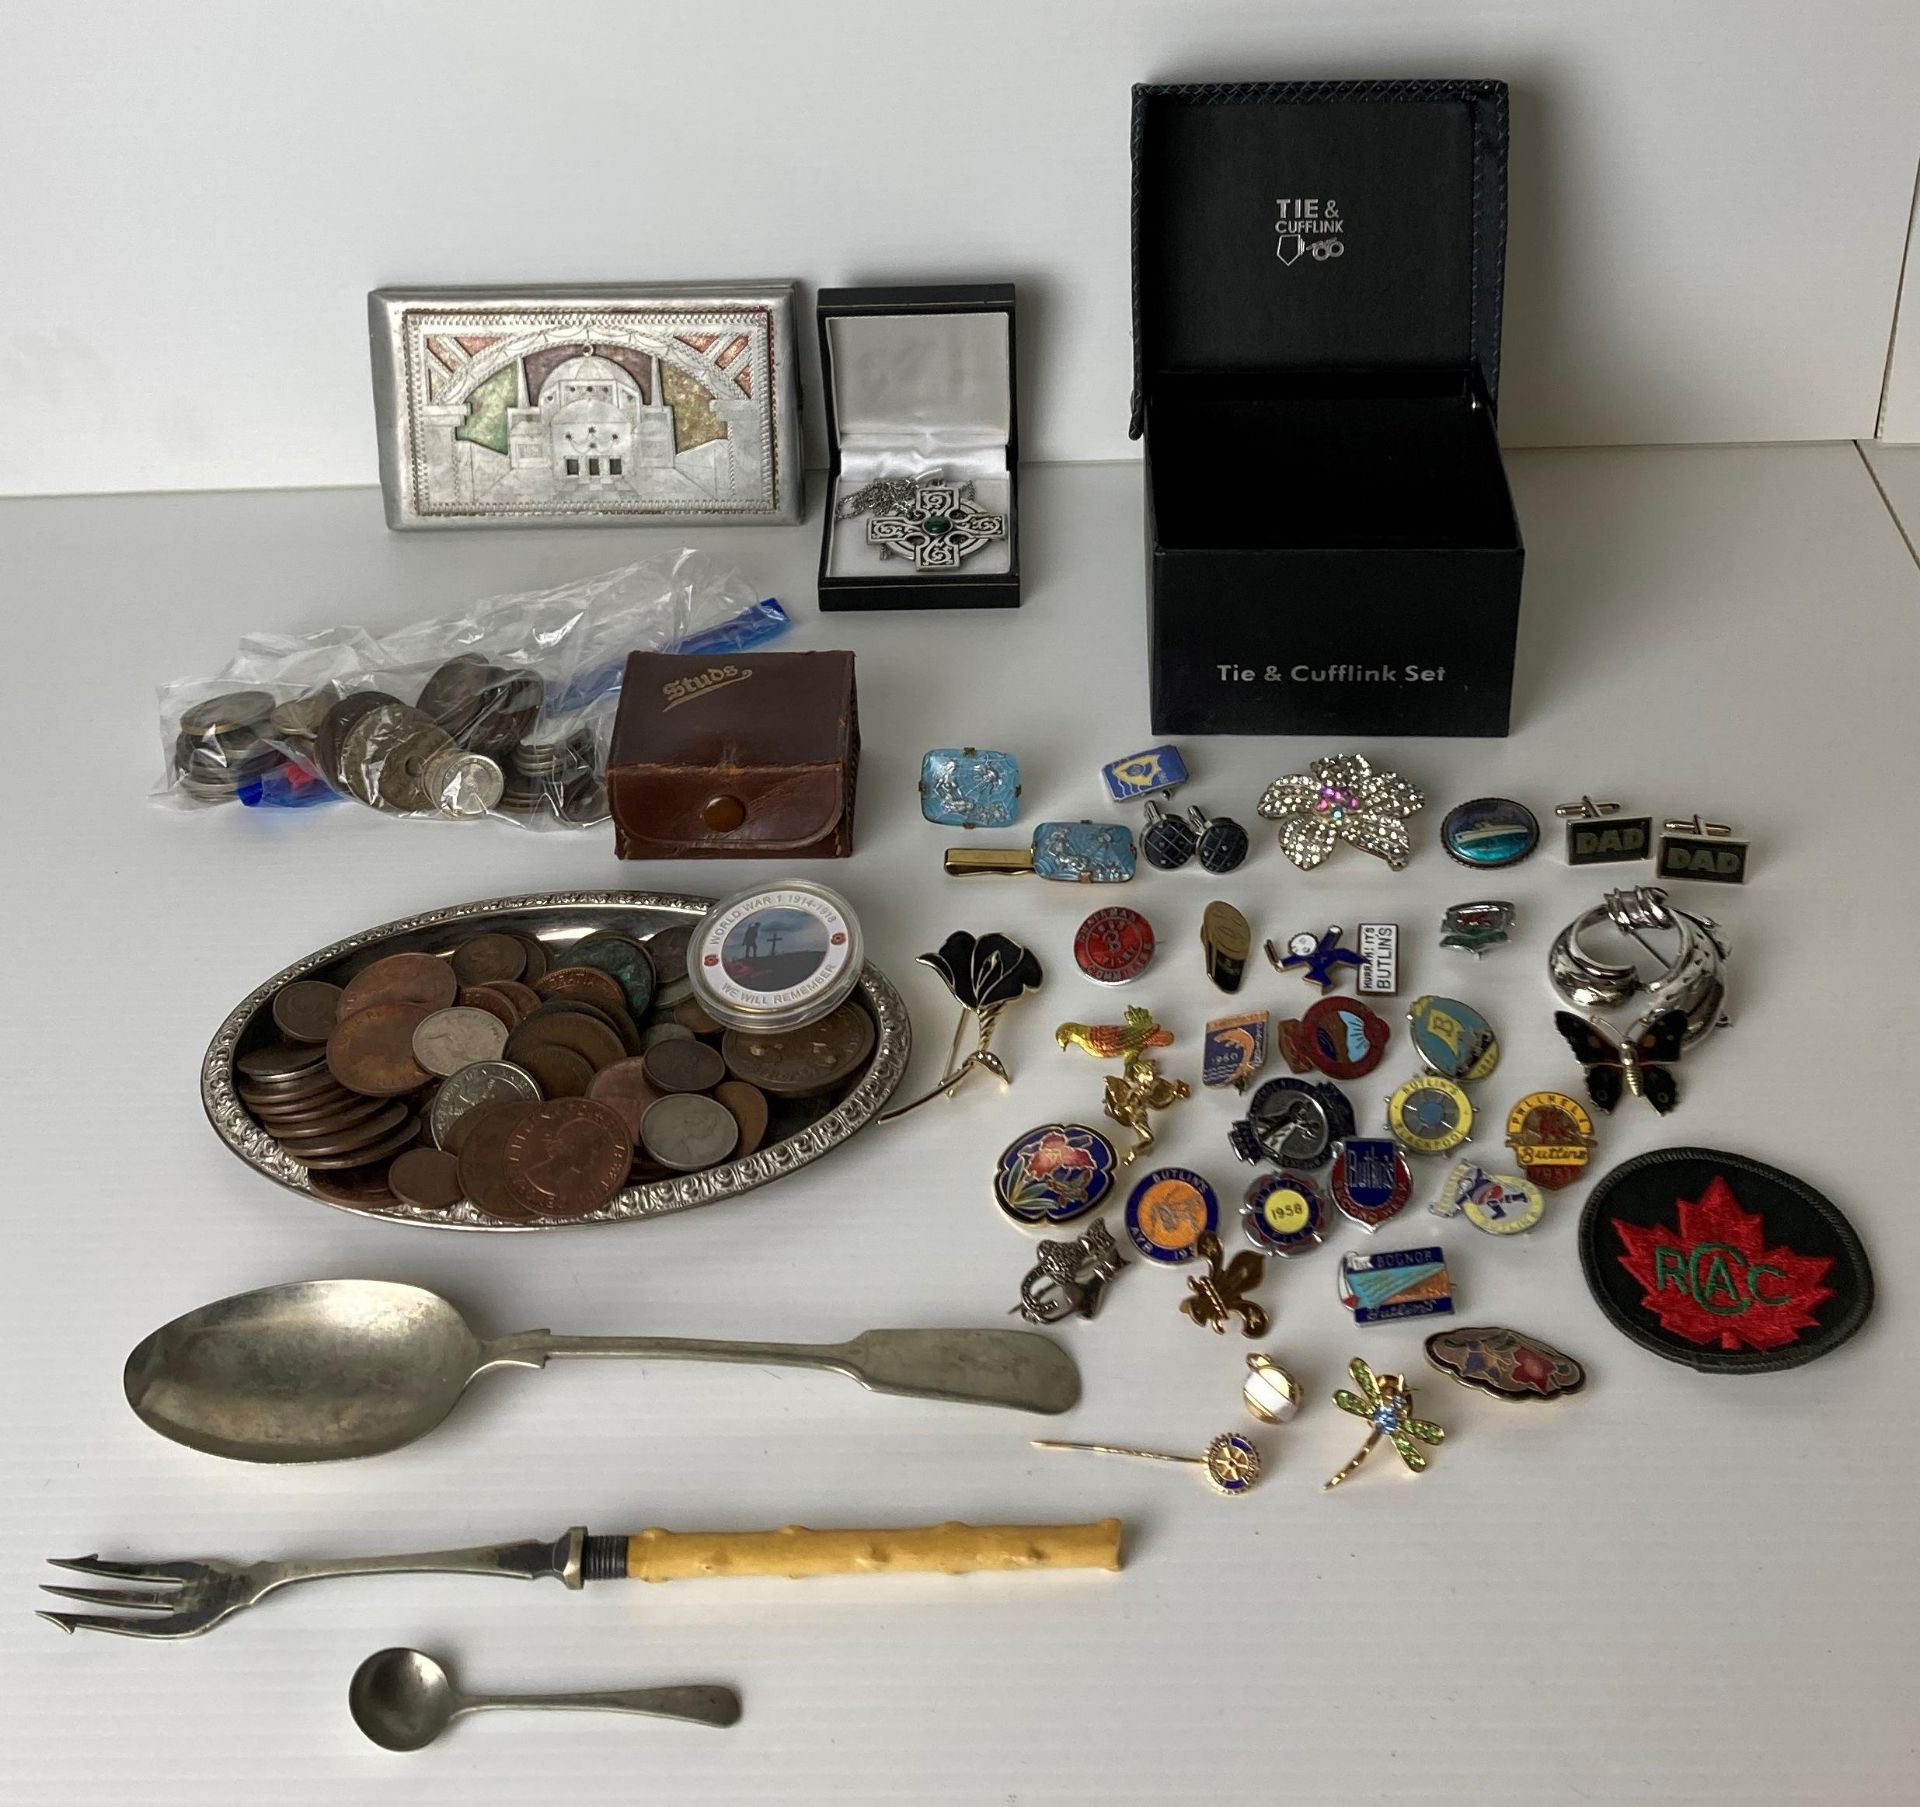 Contents to box - assorted coins, badges, cufflinks, pewter Celtic cross with green stone,